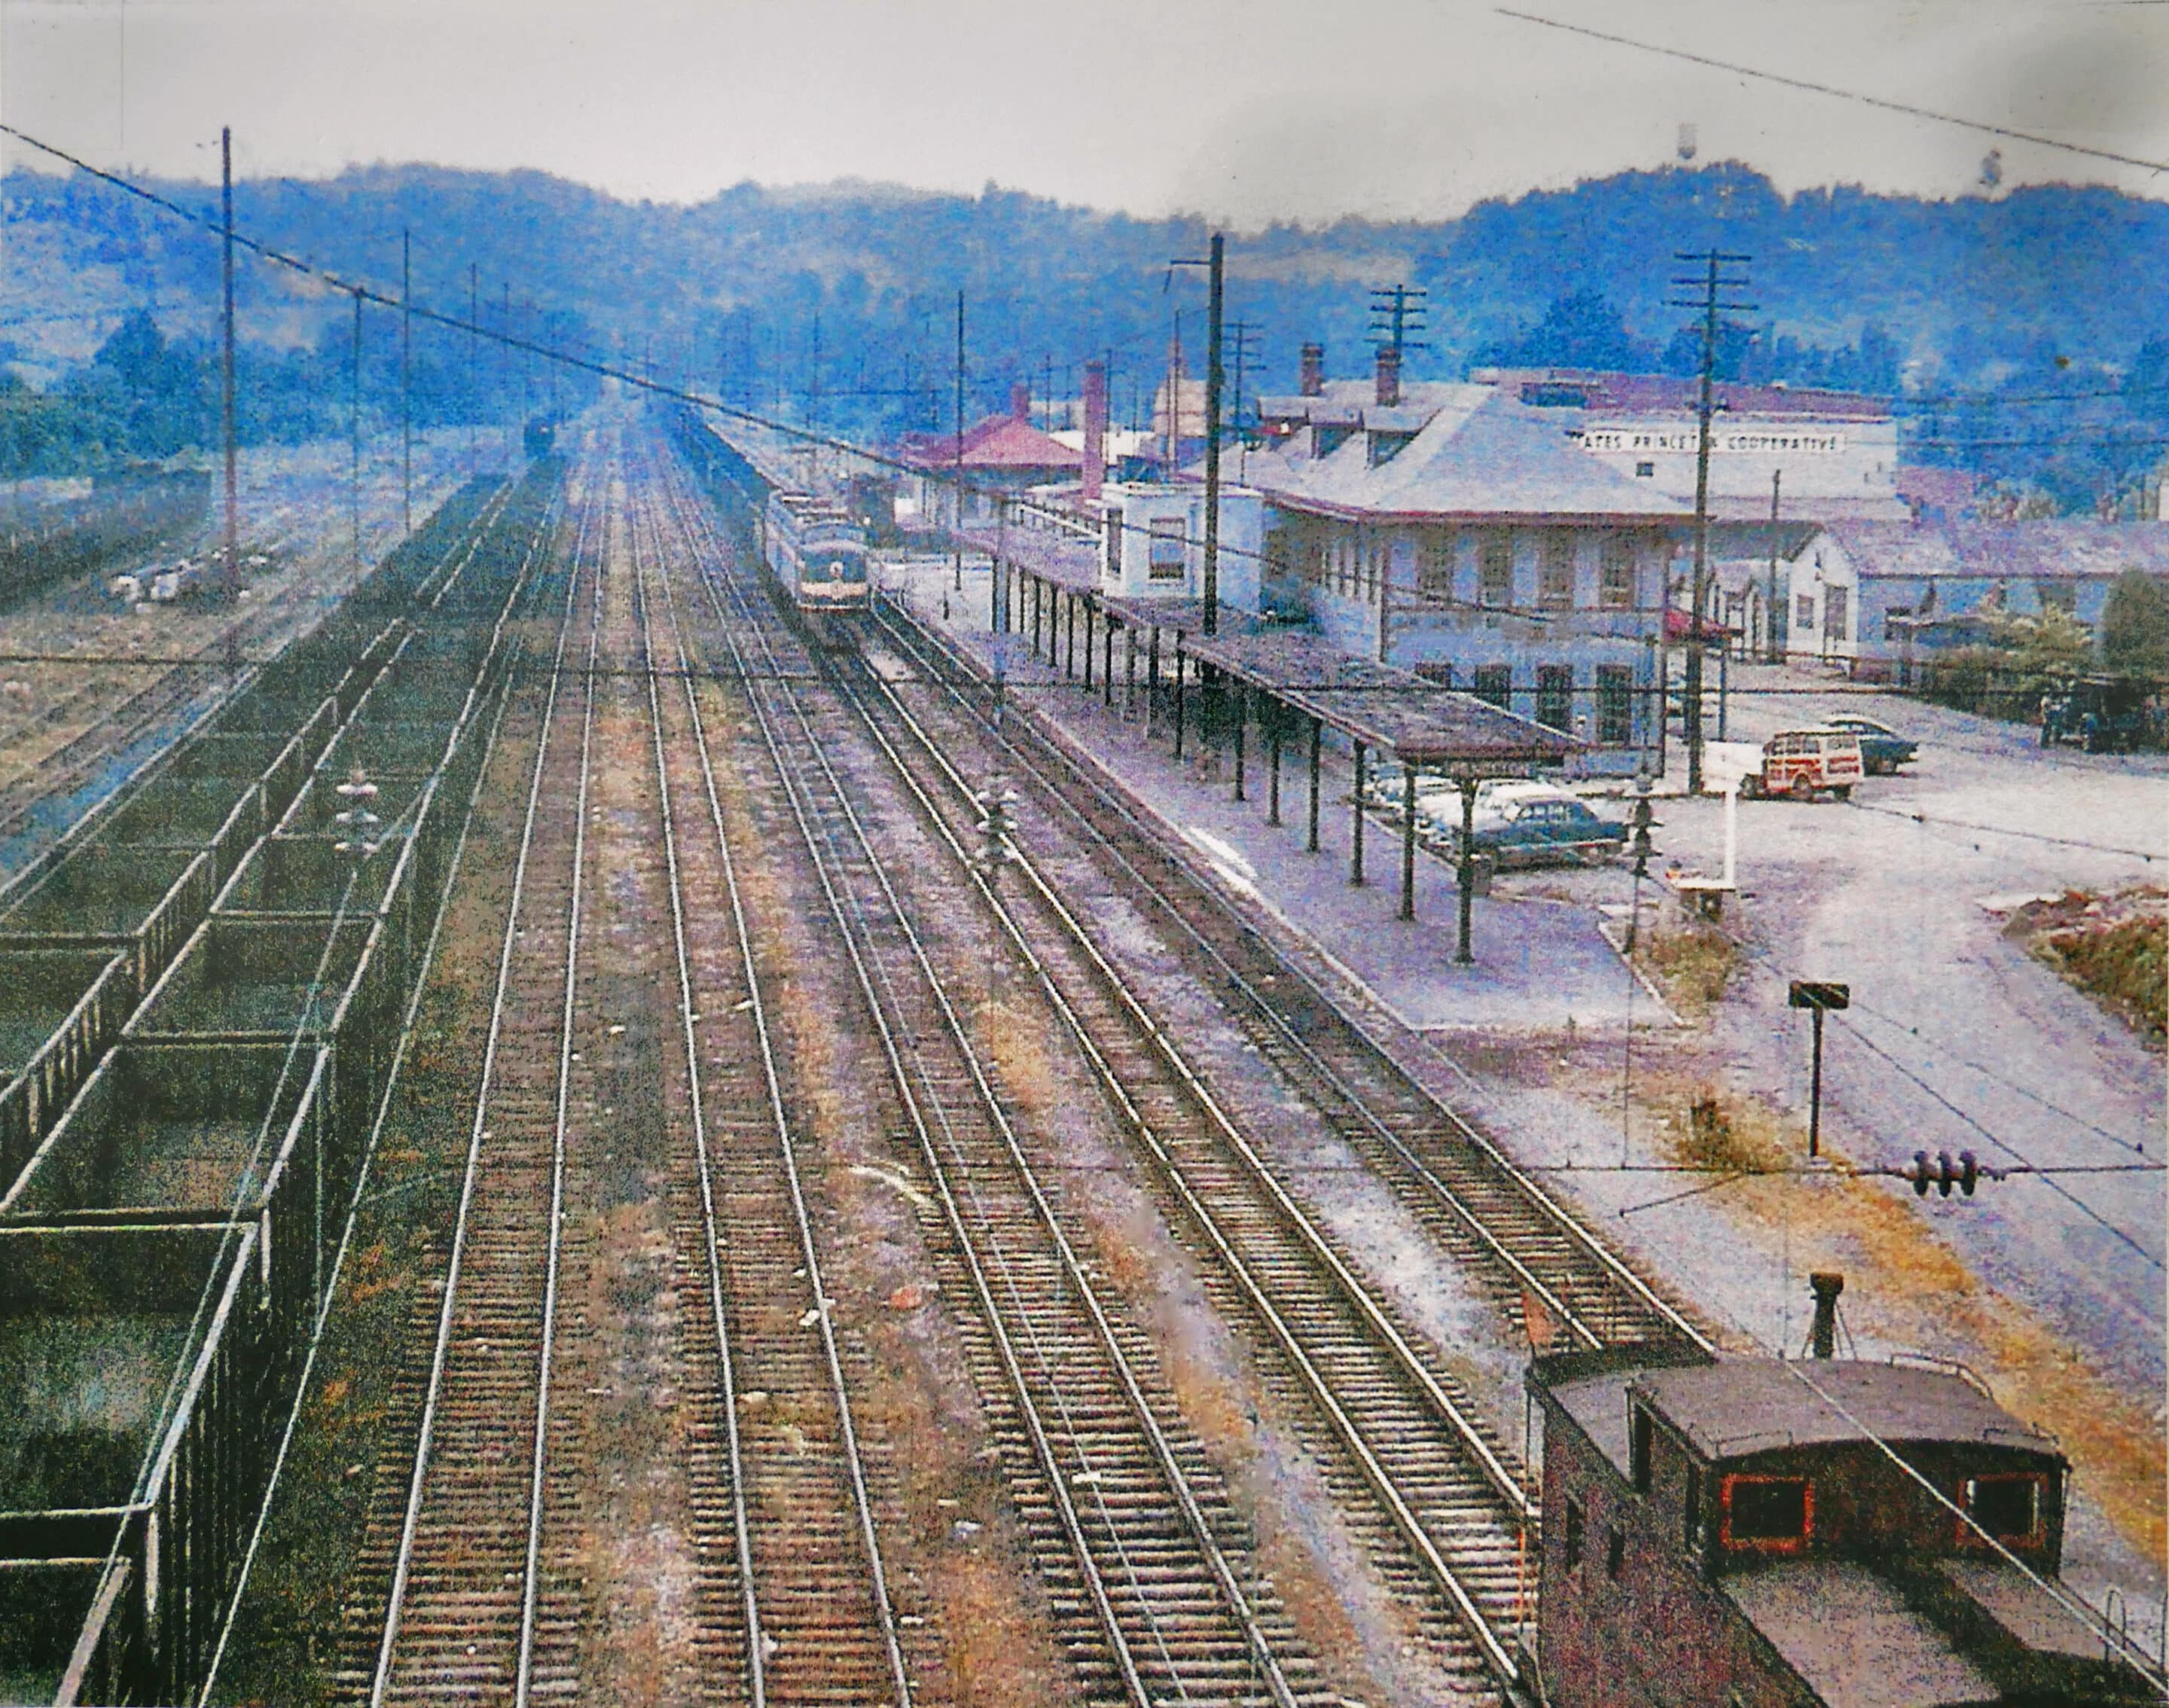 A historic photo of the Princeton railroad station with railroad shops along the tracks.